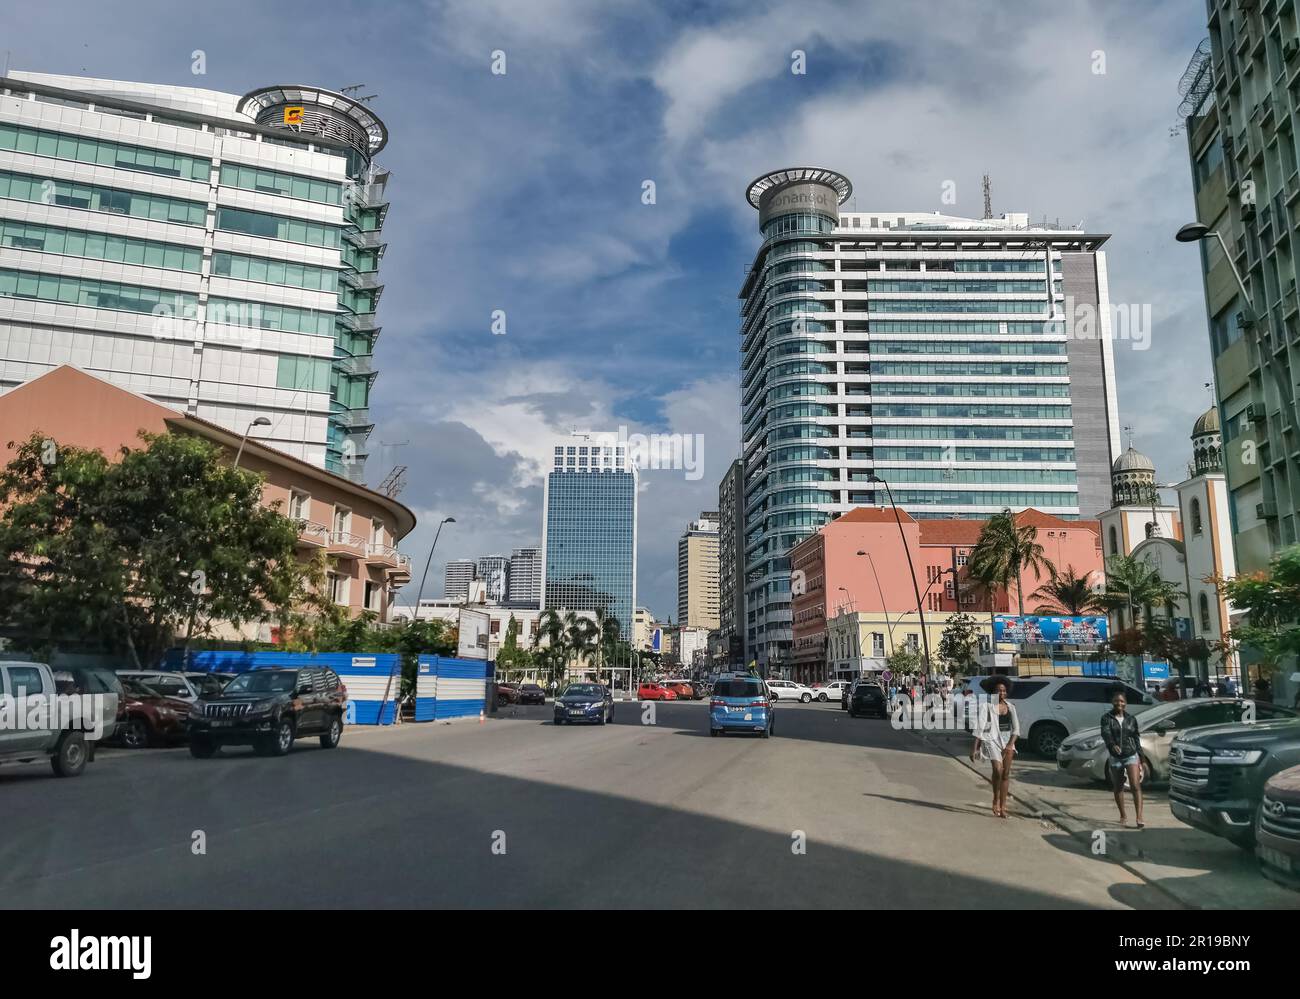 Luanda Angola - 03 24 2023: View at the Rainha Ginga street, Sonangol head offices, public Angolan oil company, downtown buildings, persons and vehicl Stock Photo